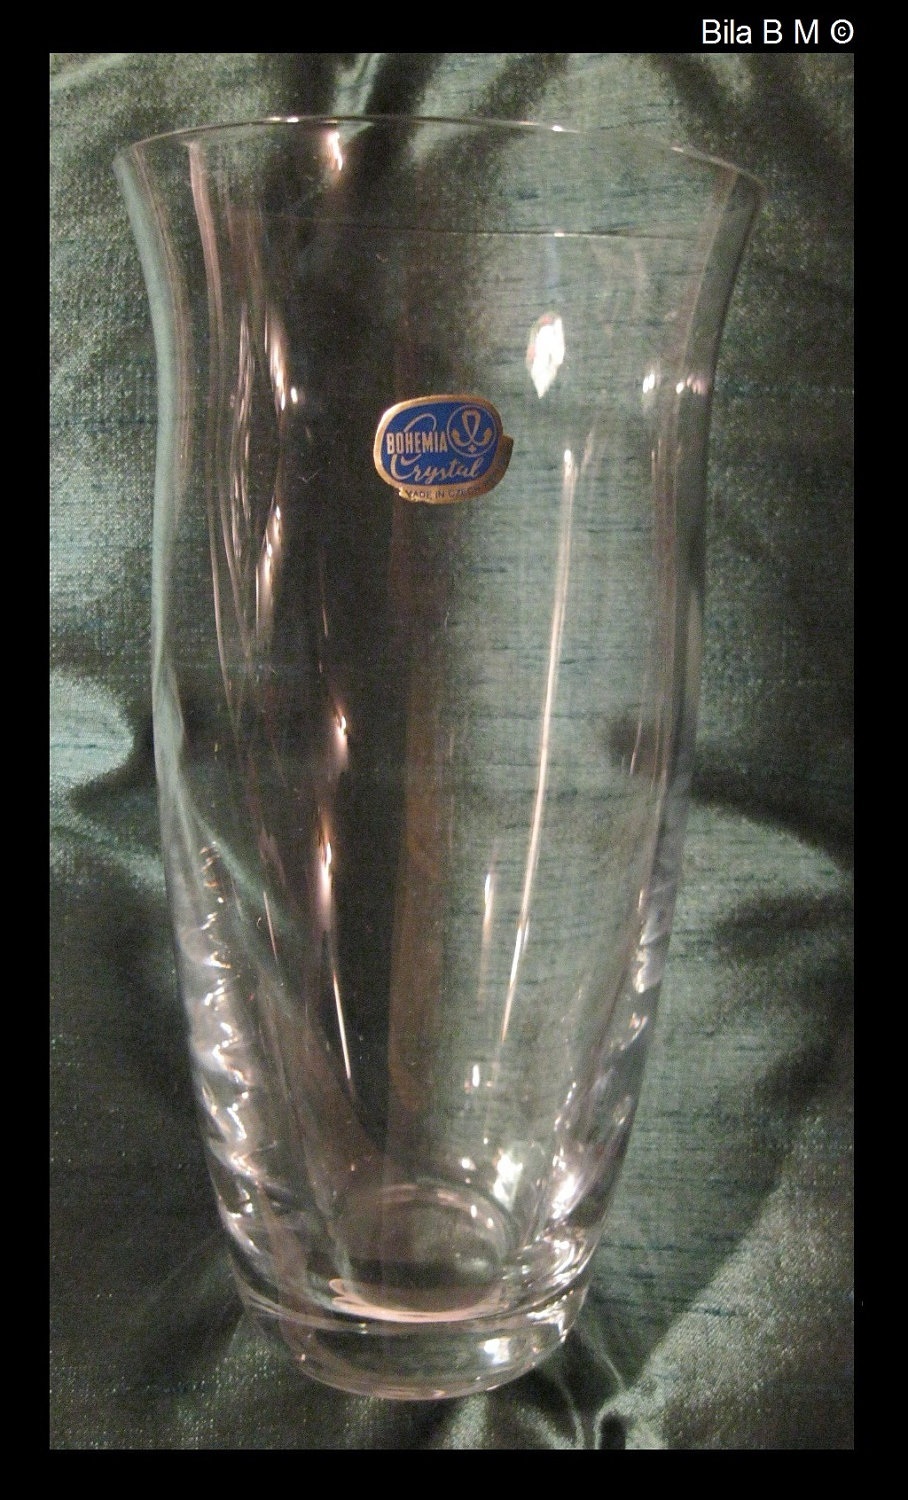 DANSK CRYSTAL Floral VASE with box - FREE SHIPPING - $35.00